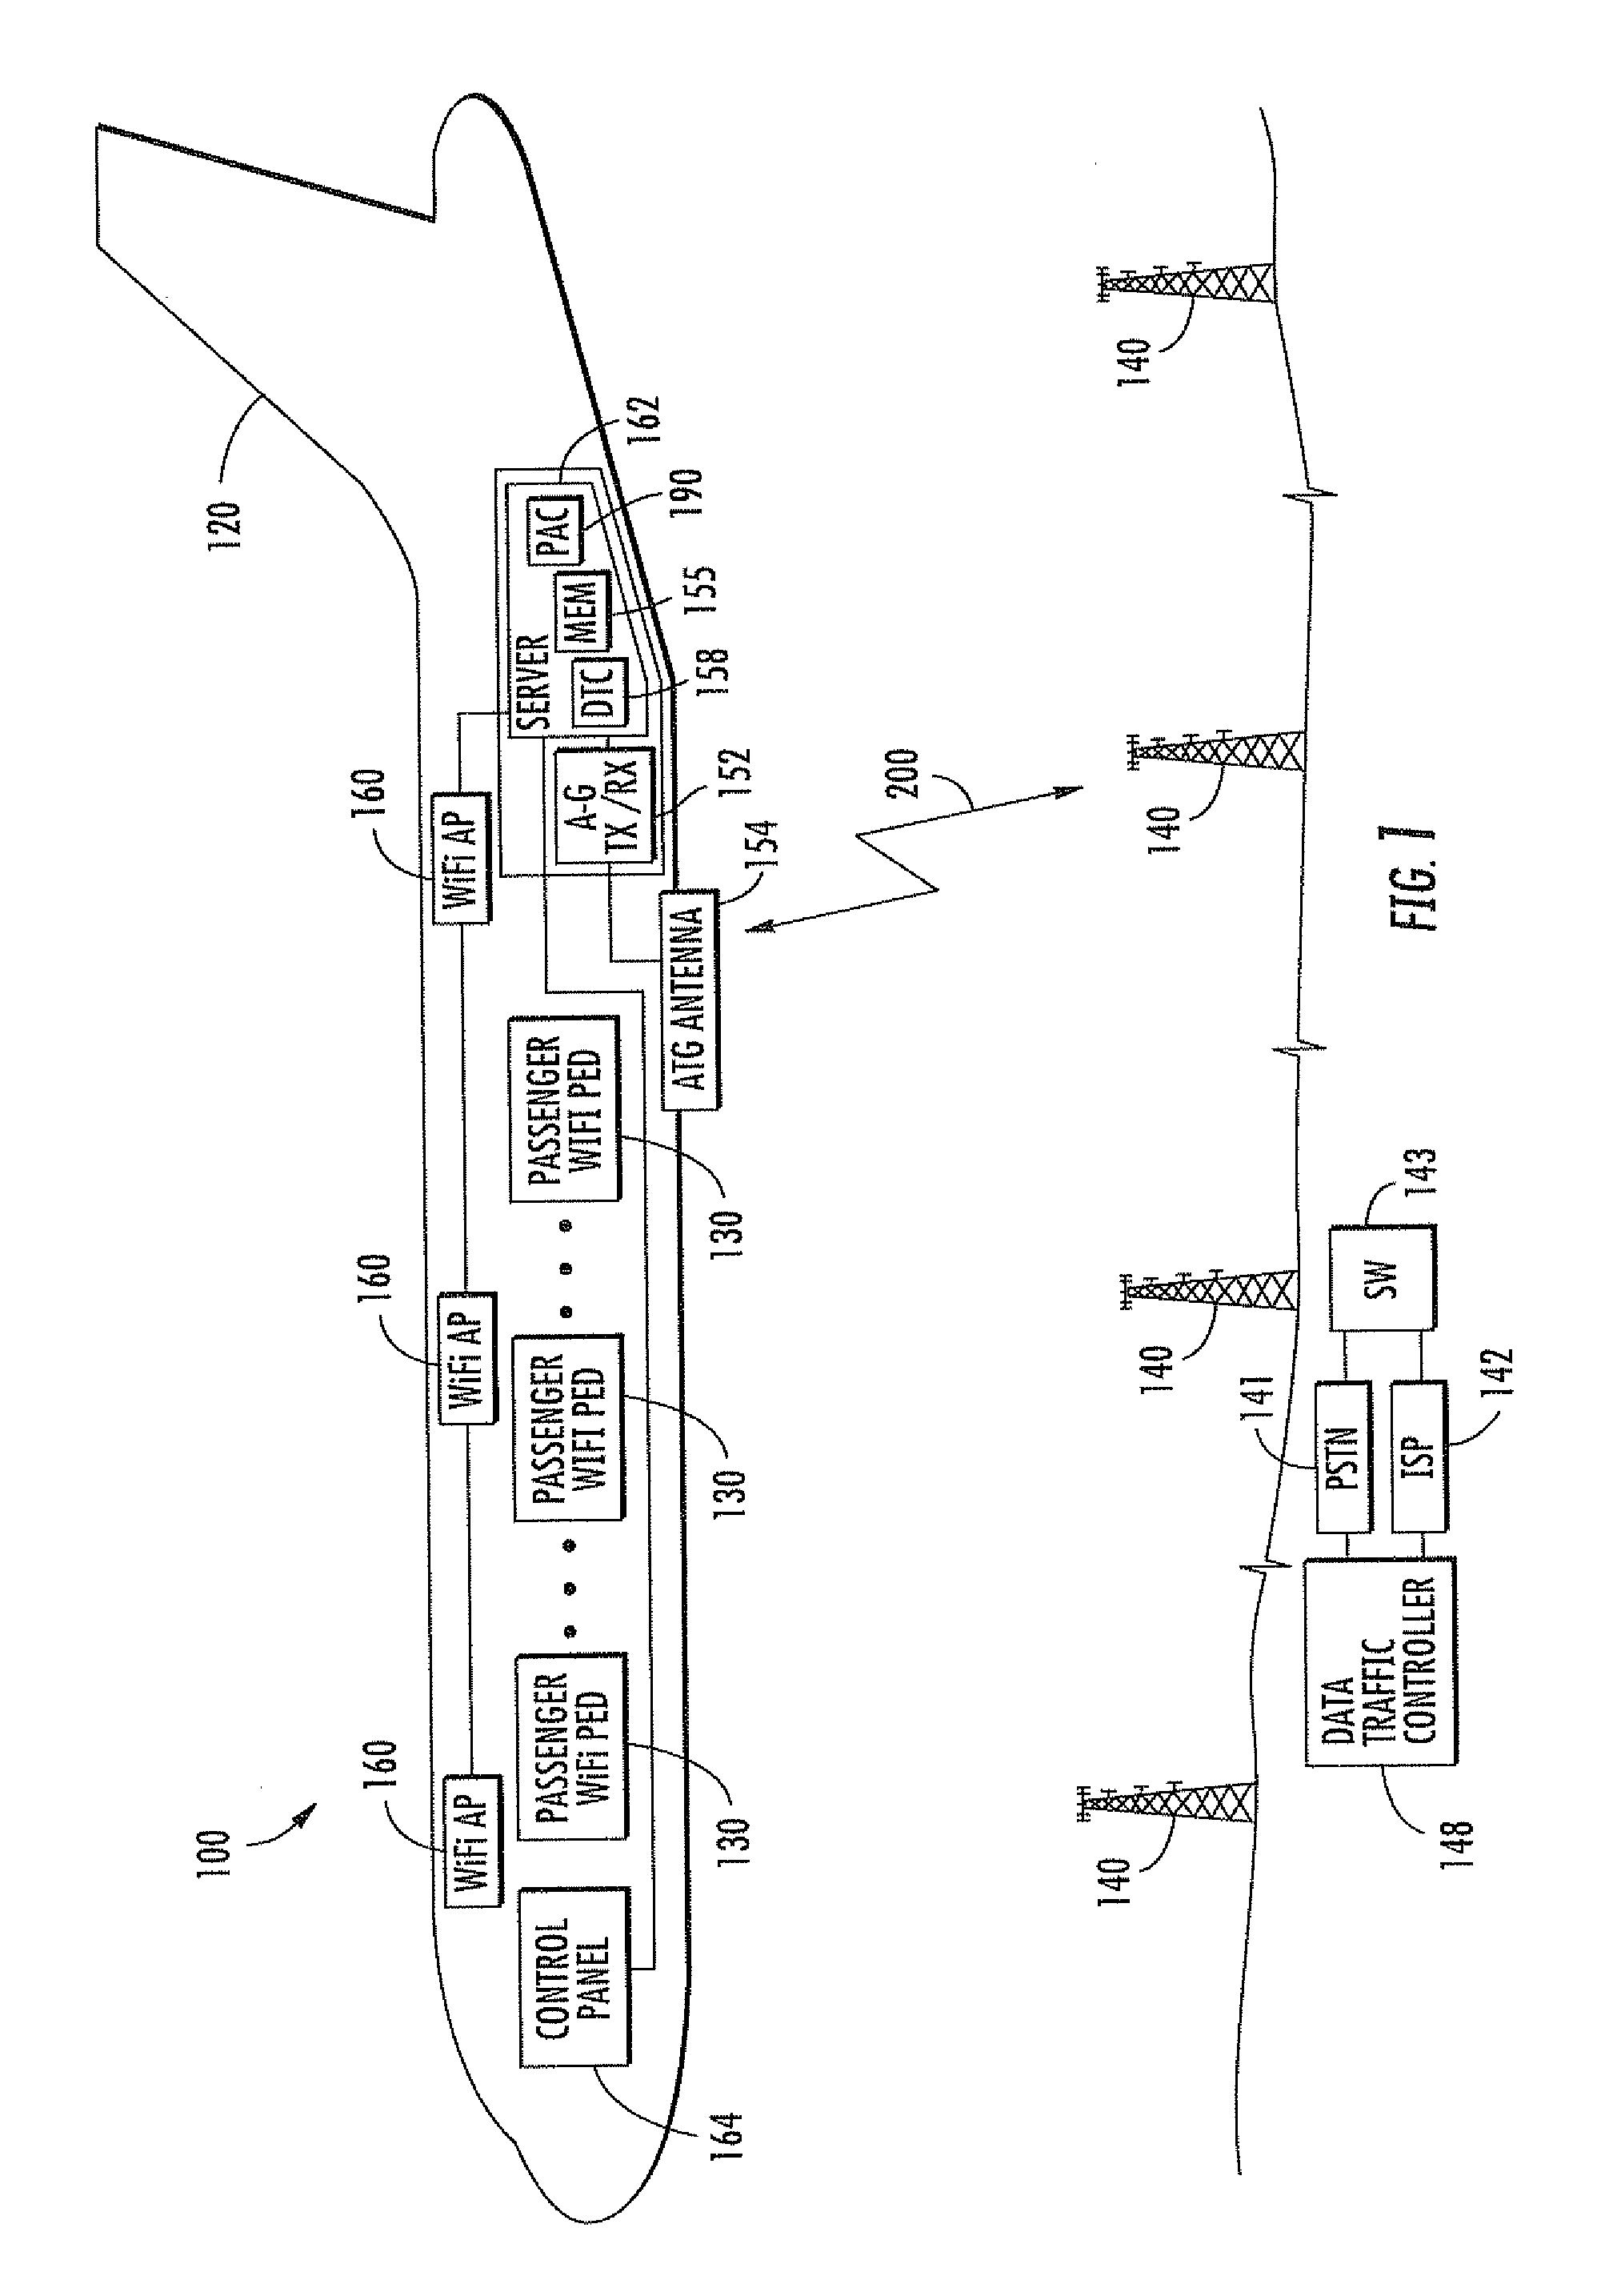 Registration of a personal electronic device (PED) with an aircraft ife system using ped generated registration token images and associated methods